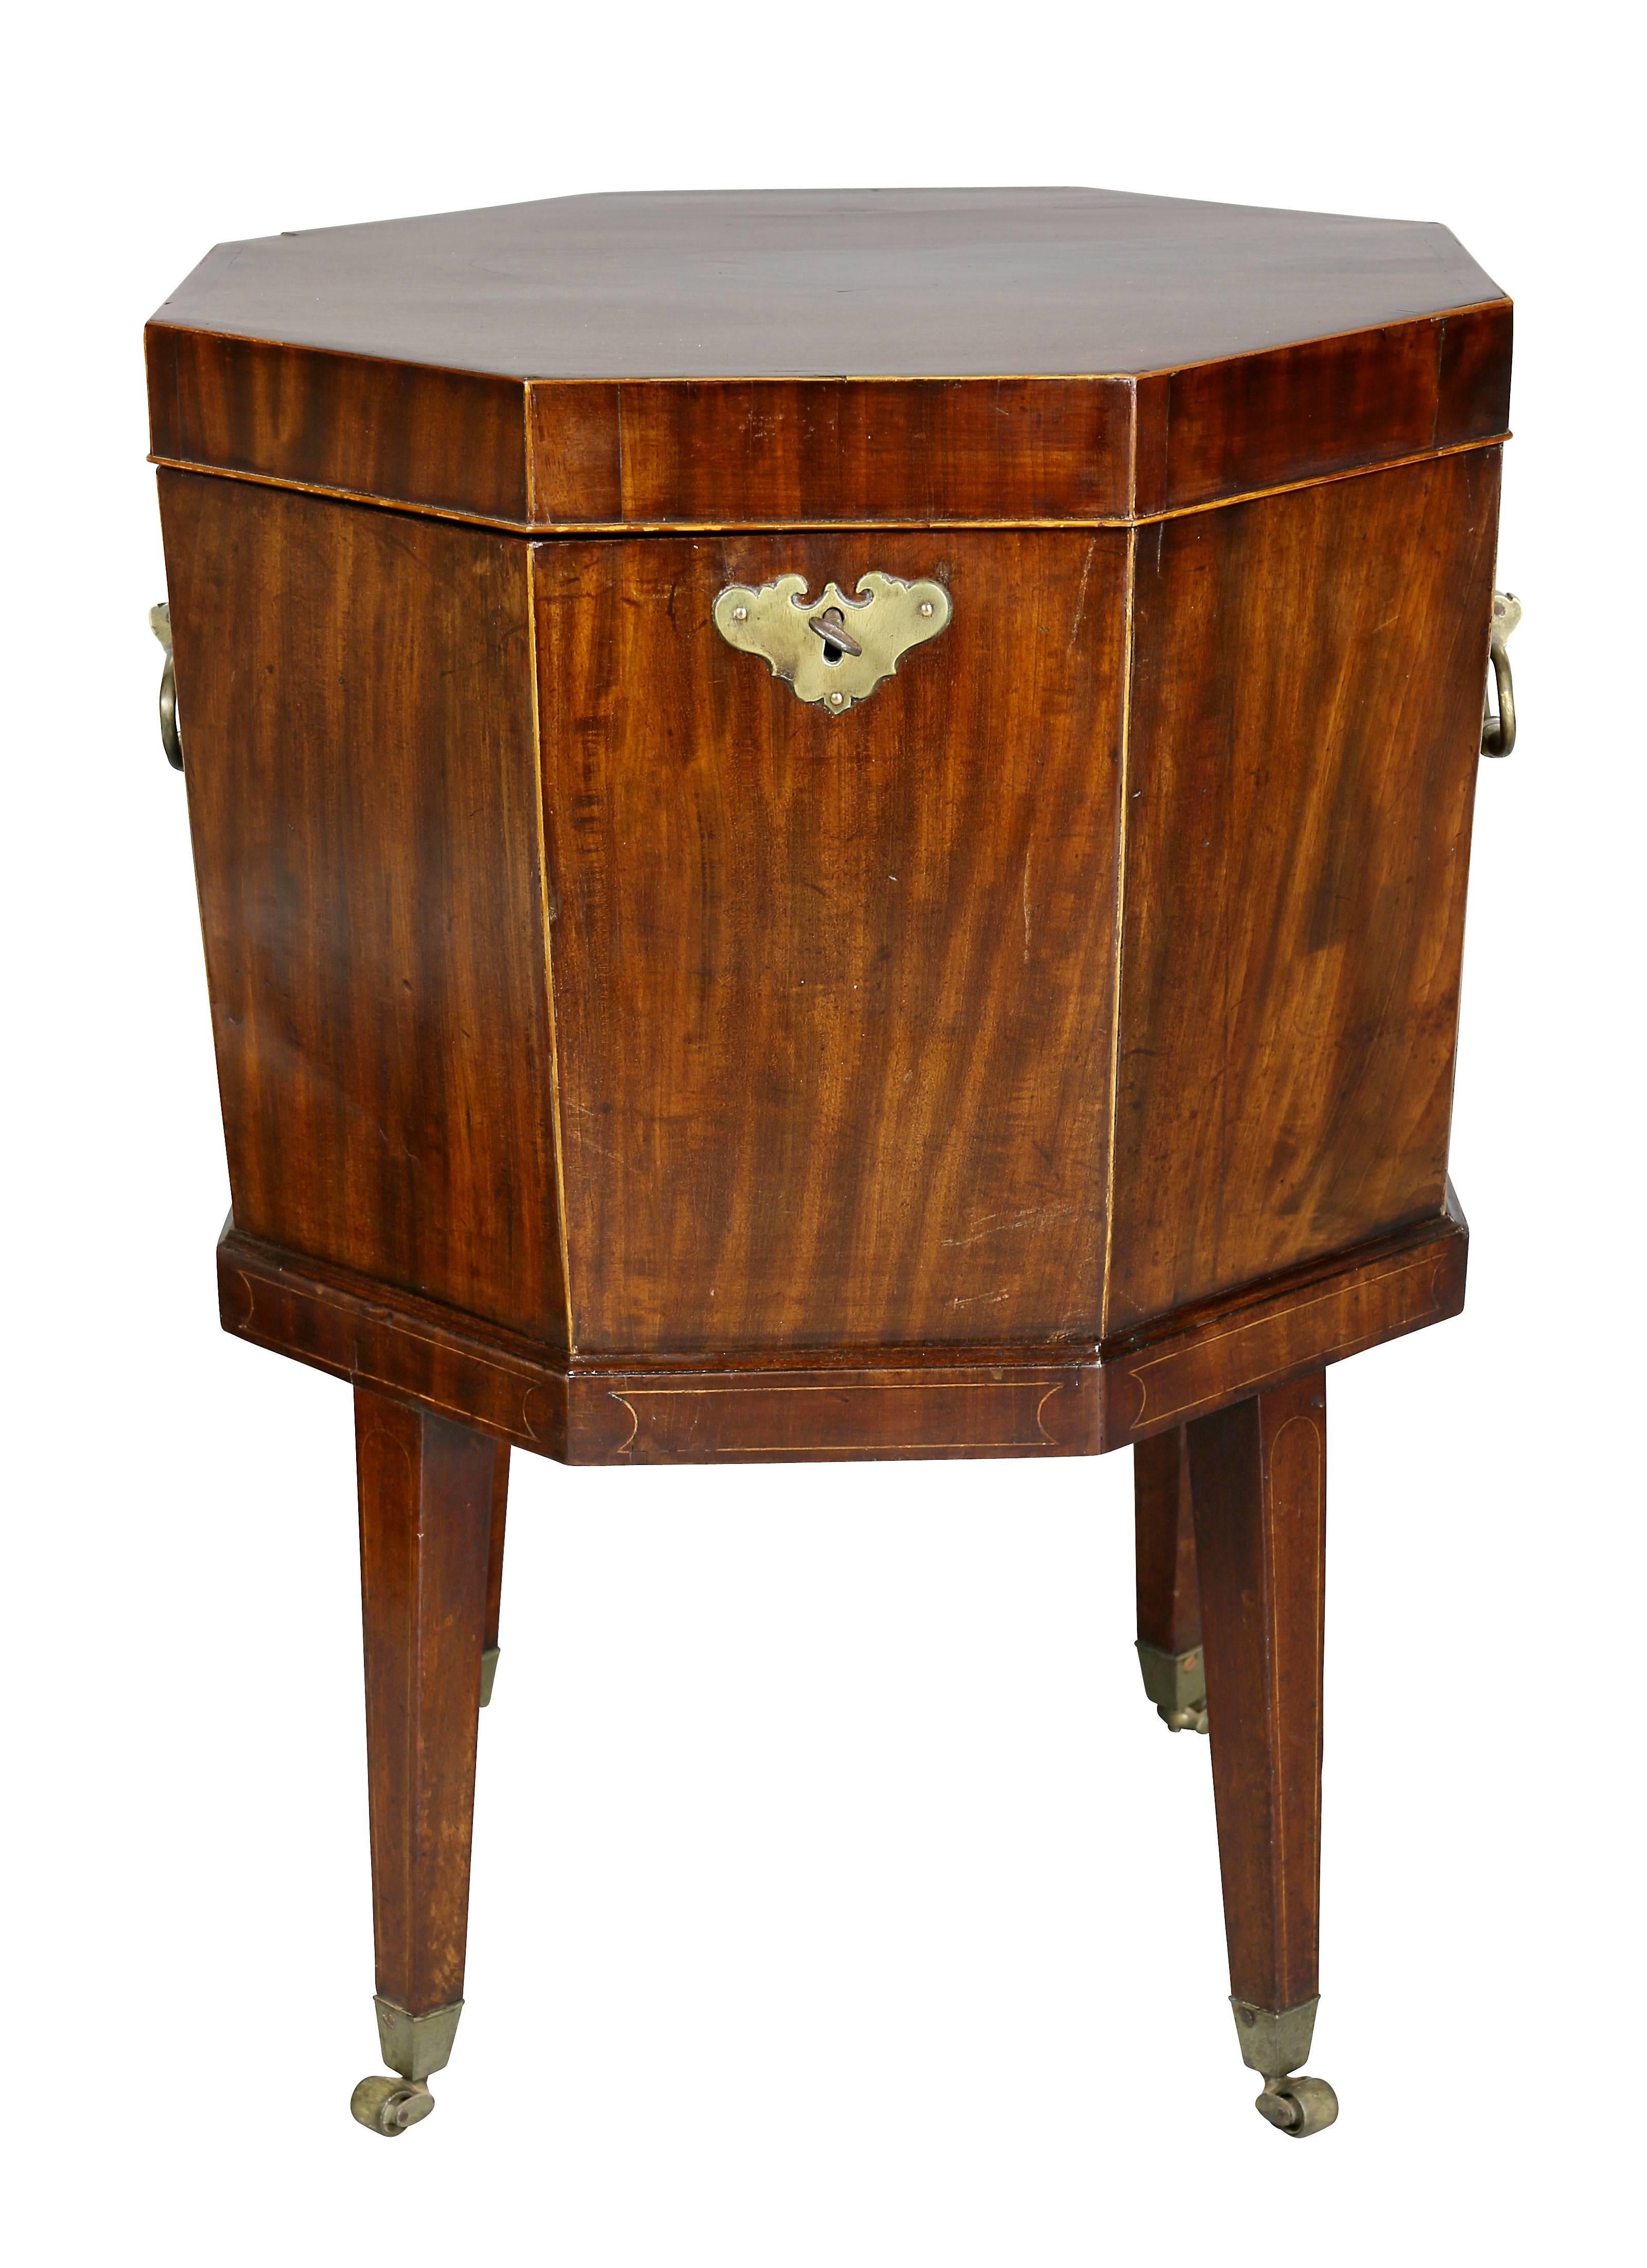 Octagonal hinged lid with conforming case raised on square tapered legs, with casters. Lacking liner.